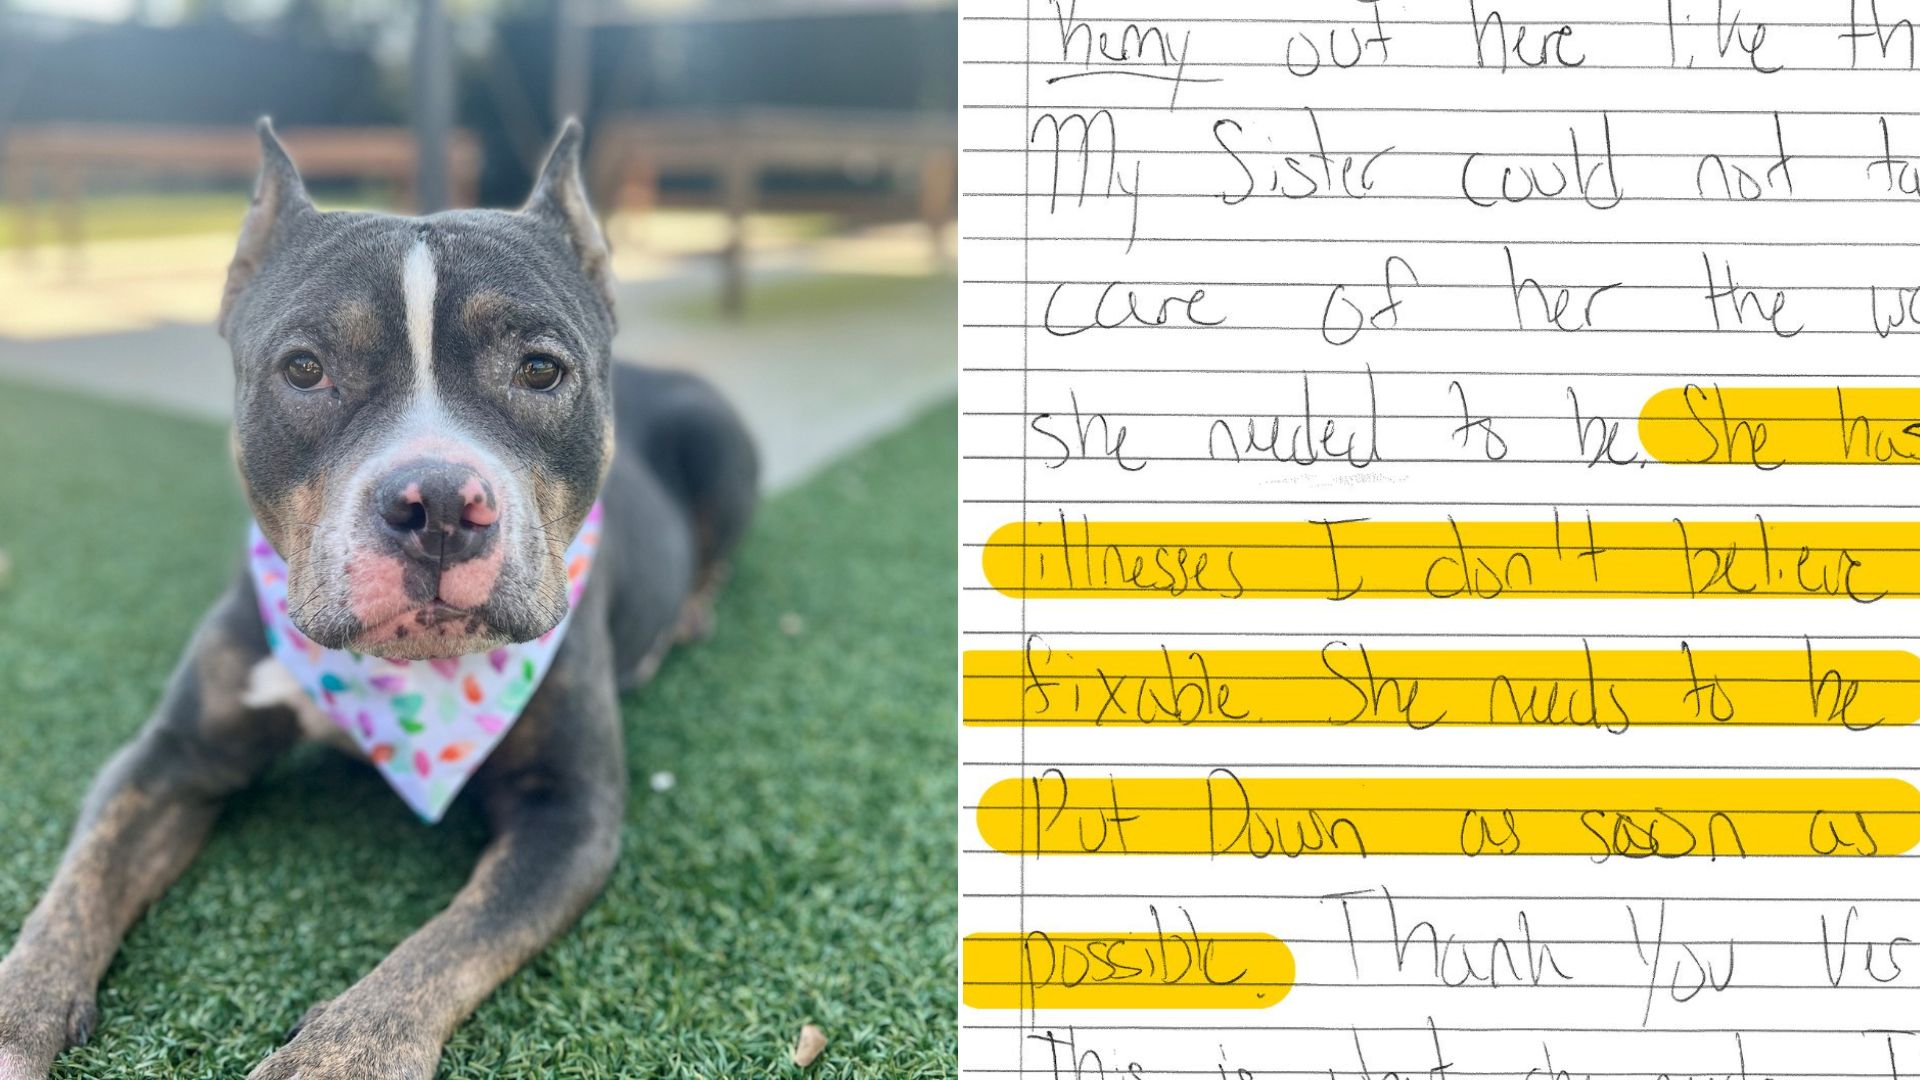 Owner Left His Dog Near A Shelter With A Note That Said She Should Be Euthanized